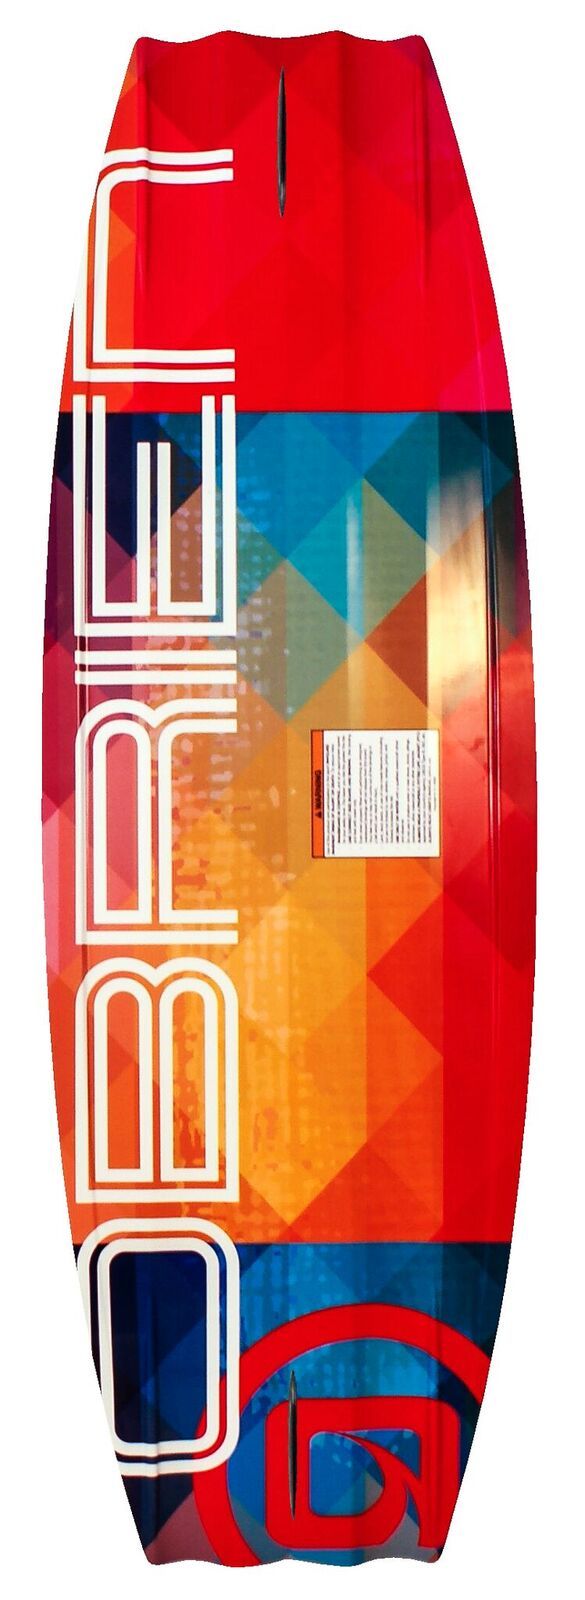  Pack wakeboard SIREN femme 135cm + Chausses Clutch 37/41v